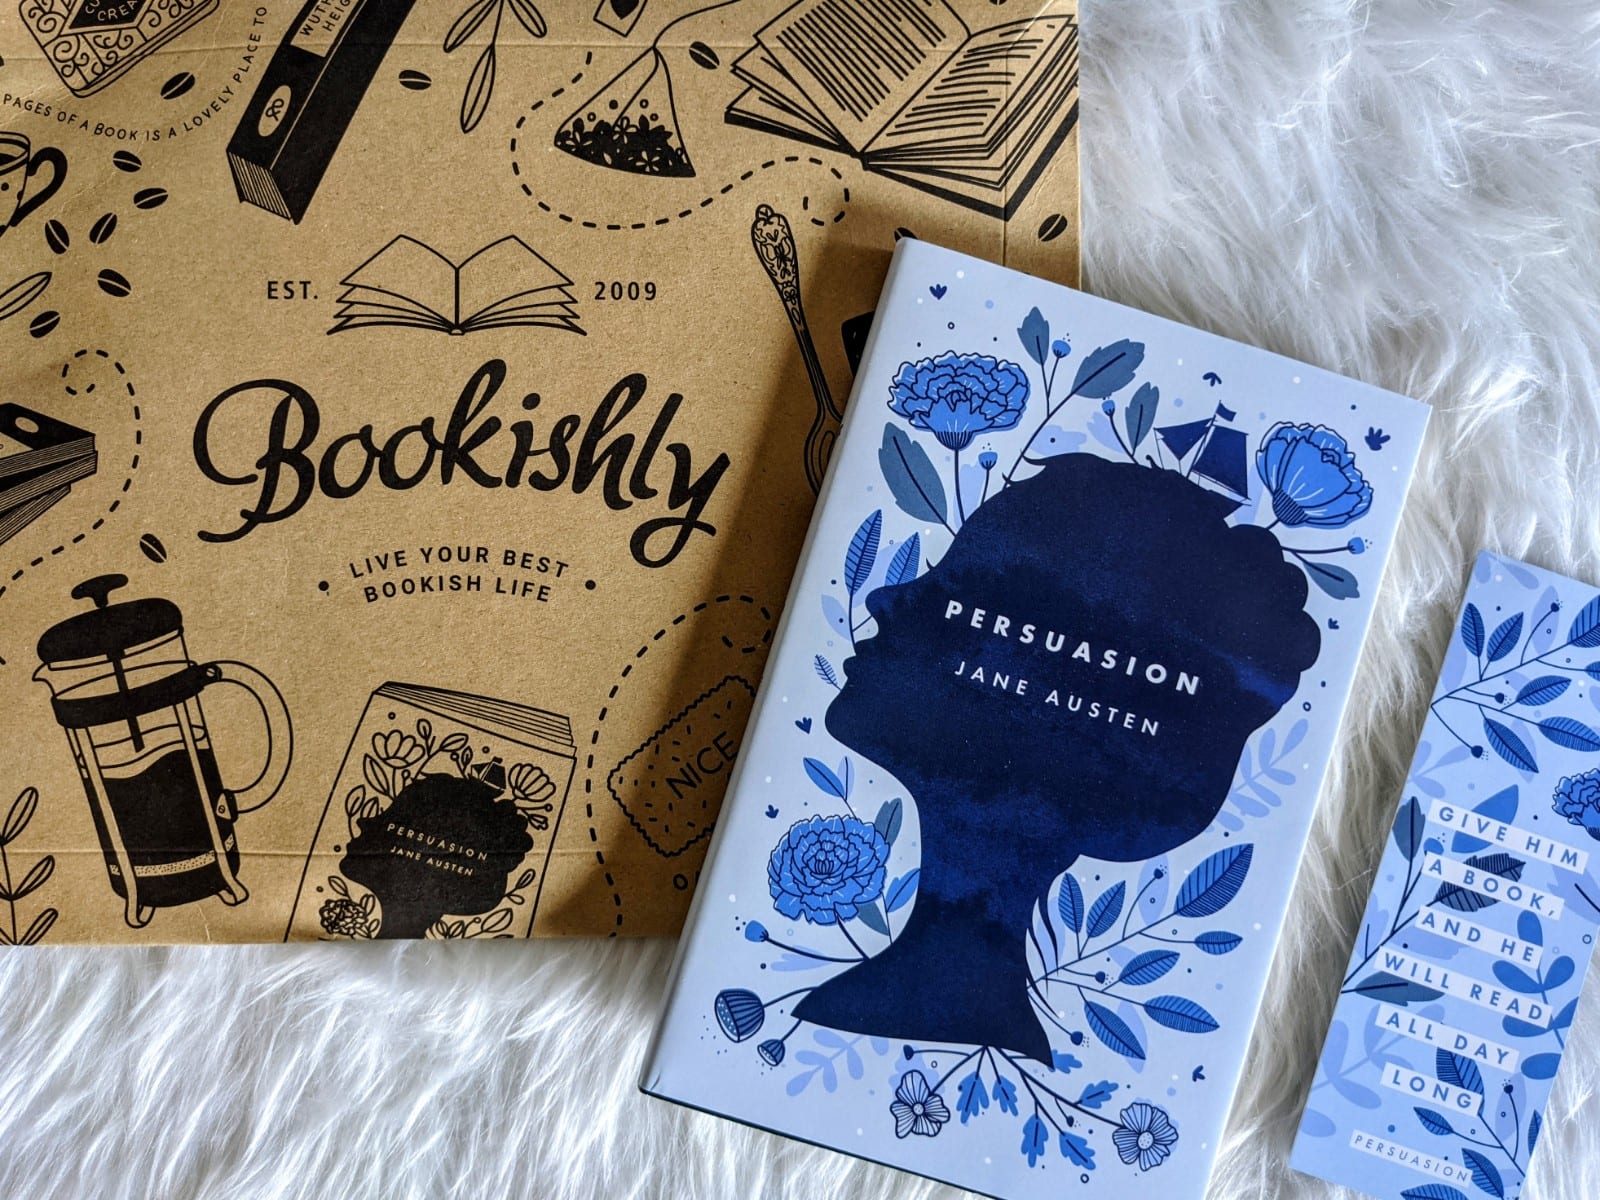 Classic of the Month Club by Bookishly Review & Coupon Code!